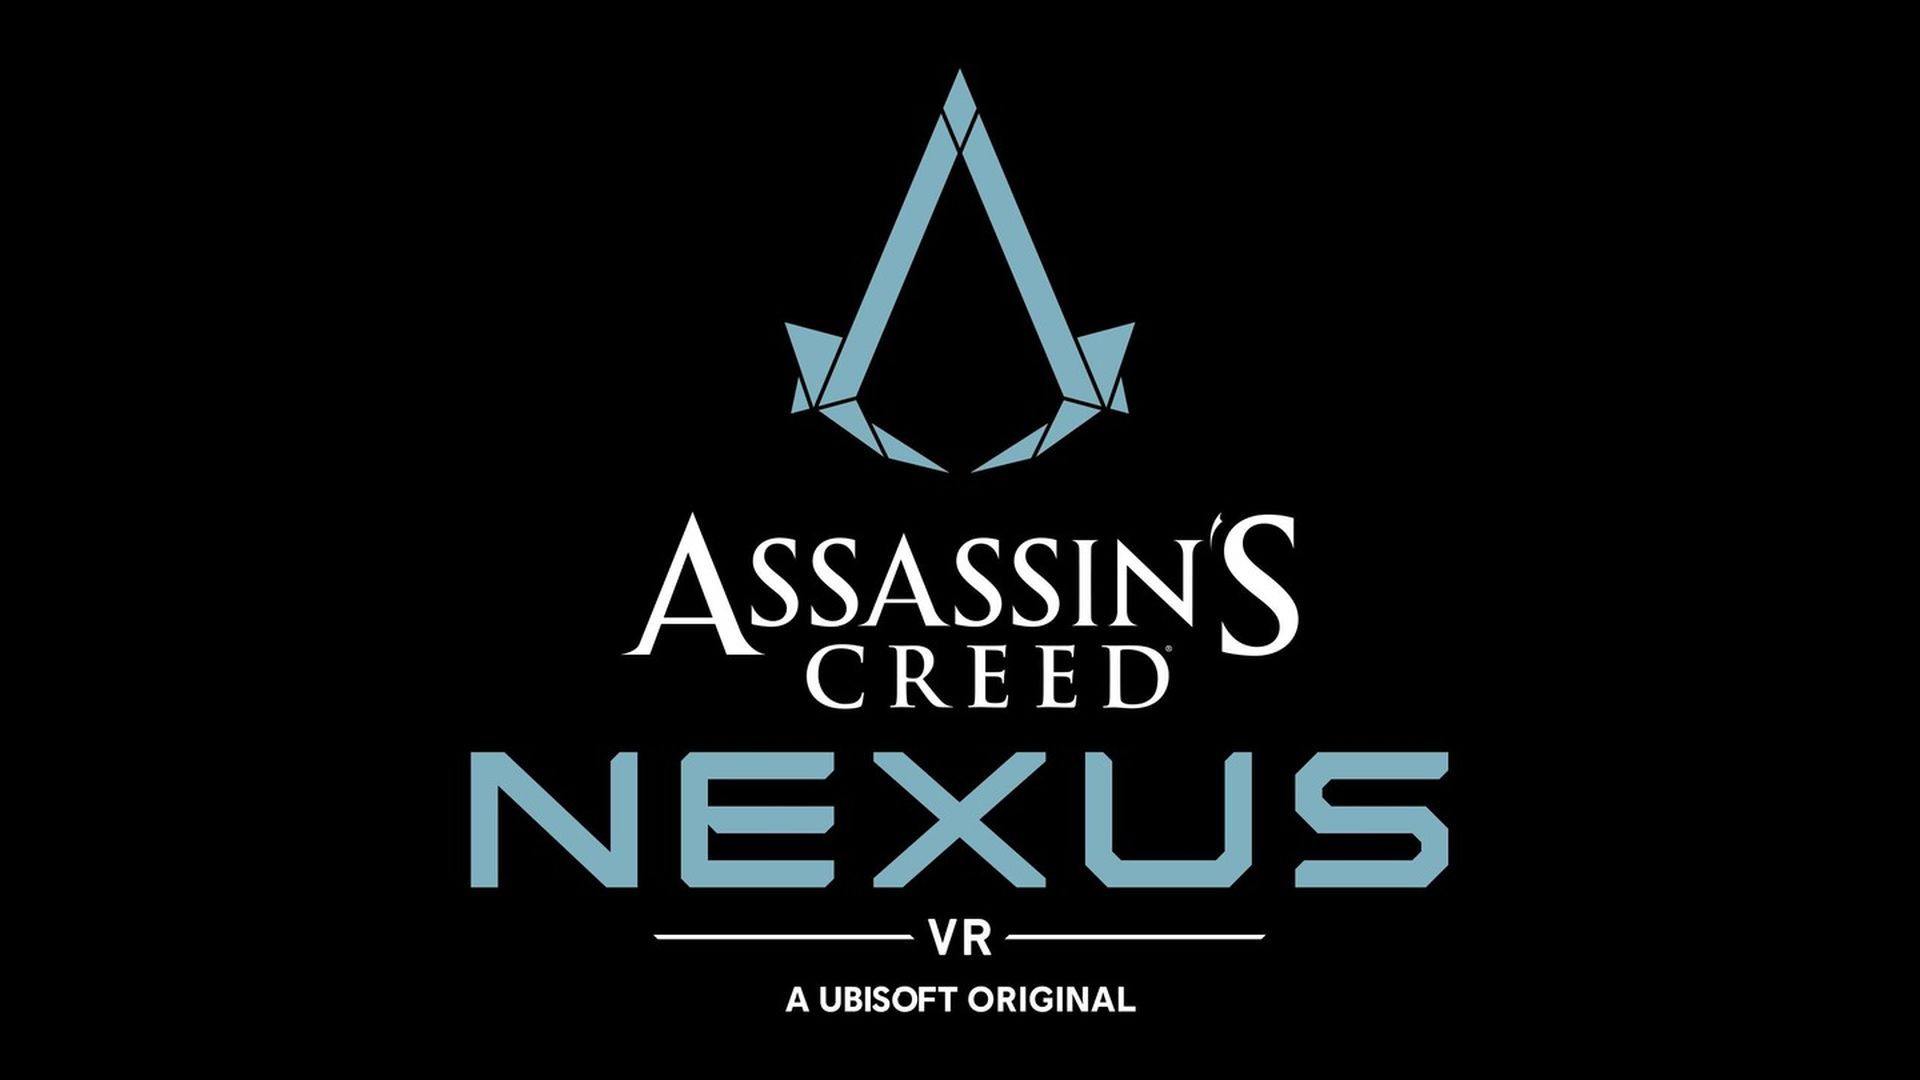 Assassin’s Creed Nexus VR Coming to Meta Quest in Holiday 2023